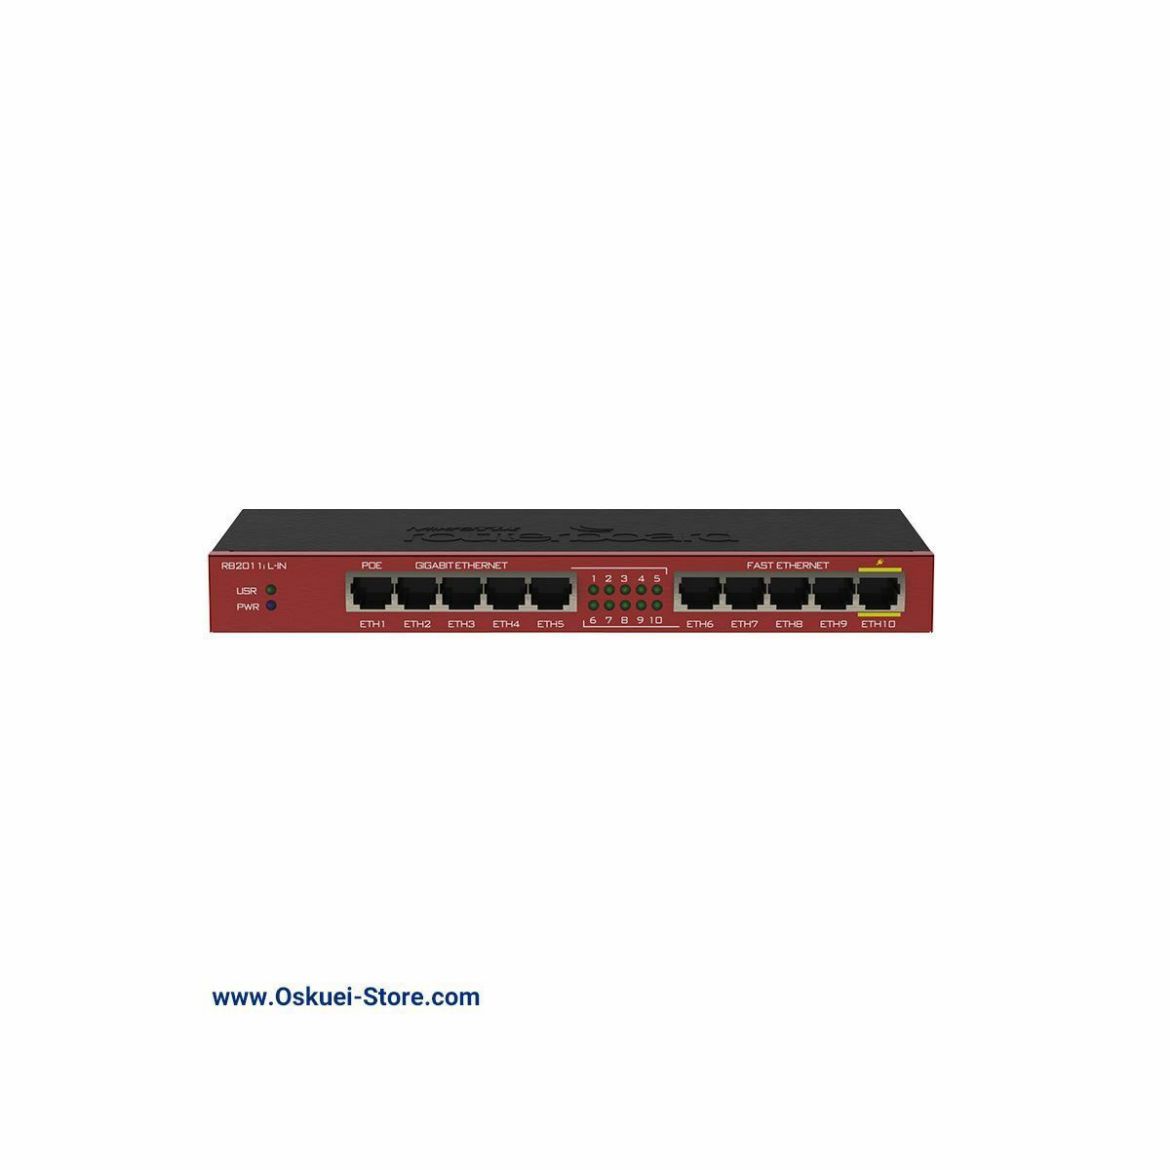 MikroTik RB2011iL-IN Router Front